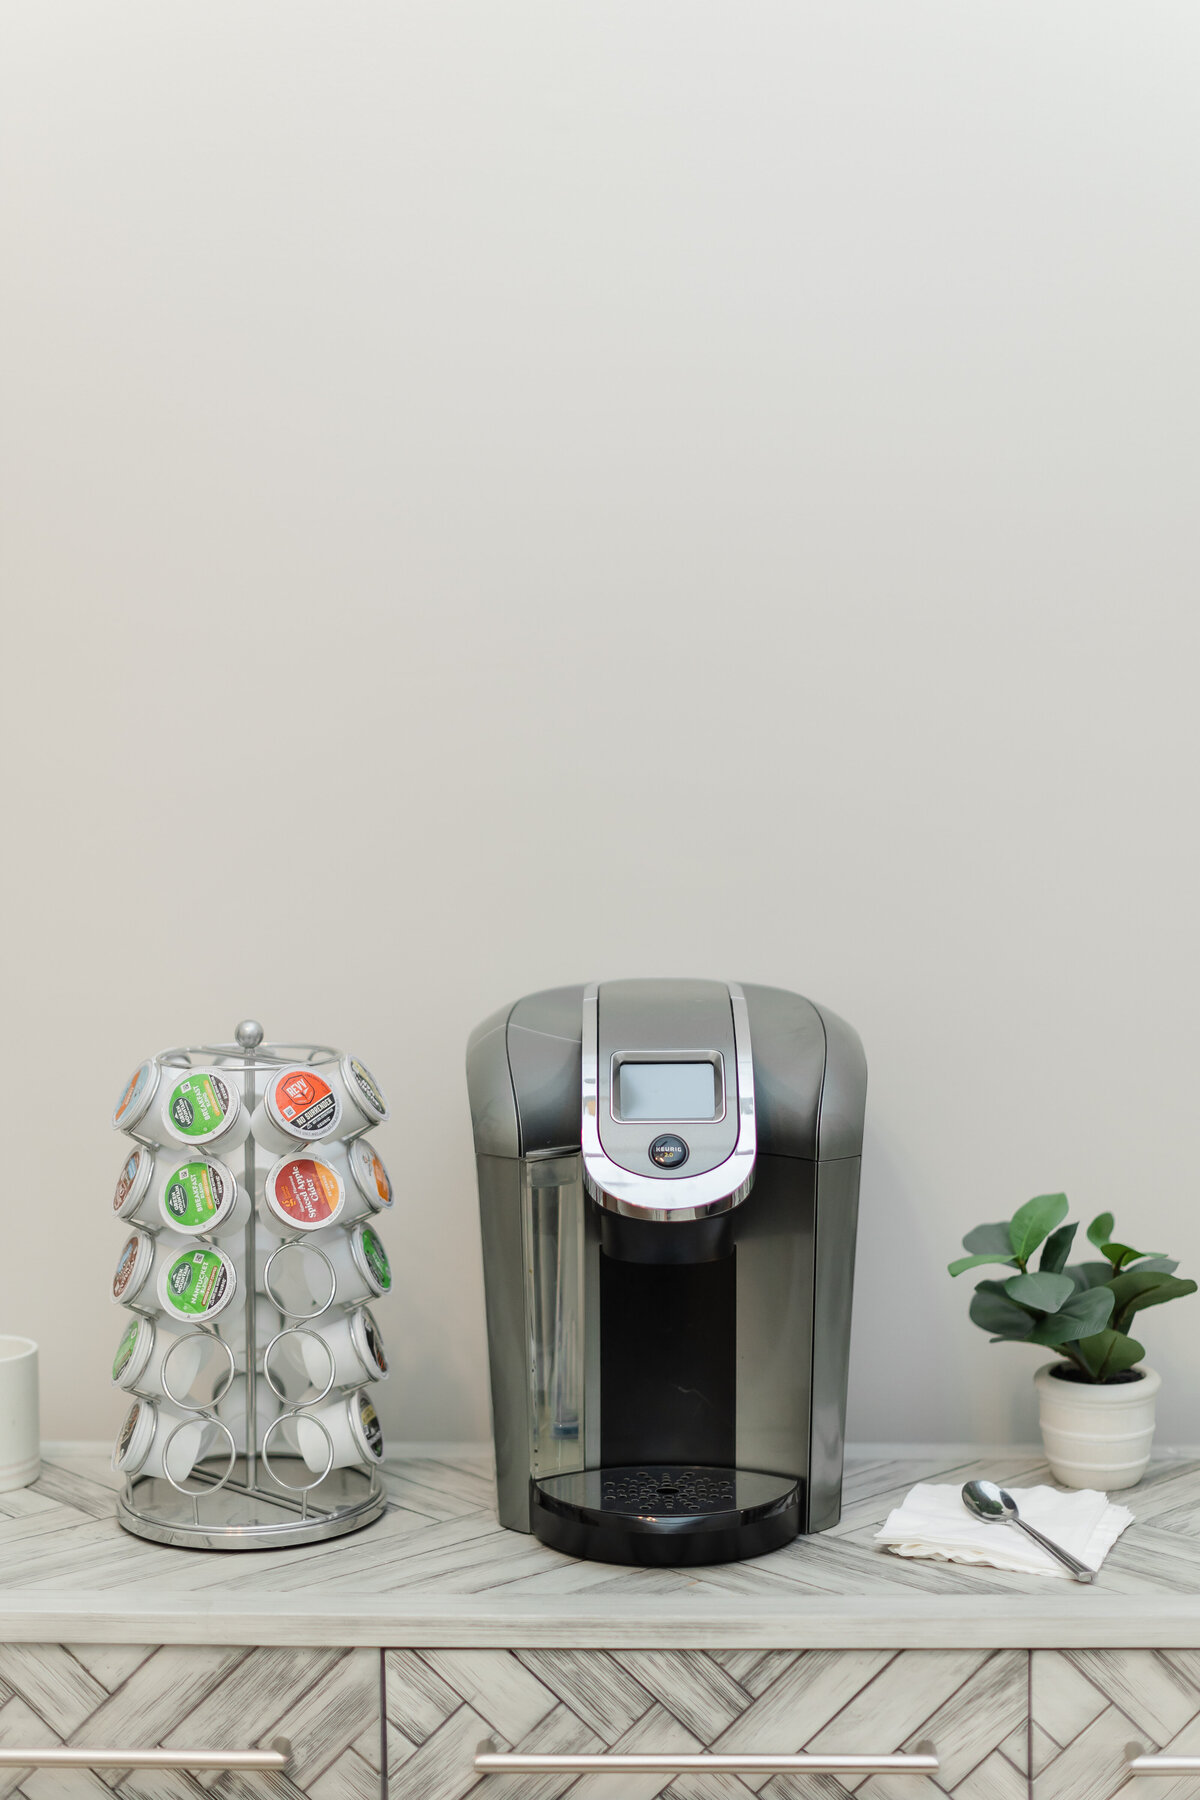 Our Nova Studio Photography coffee station with a keurig and coffee pods